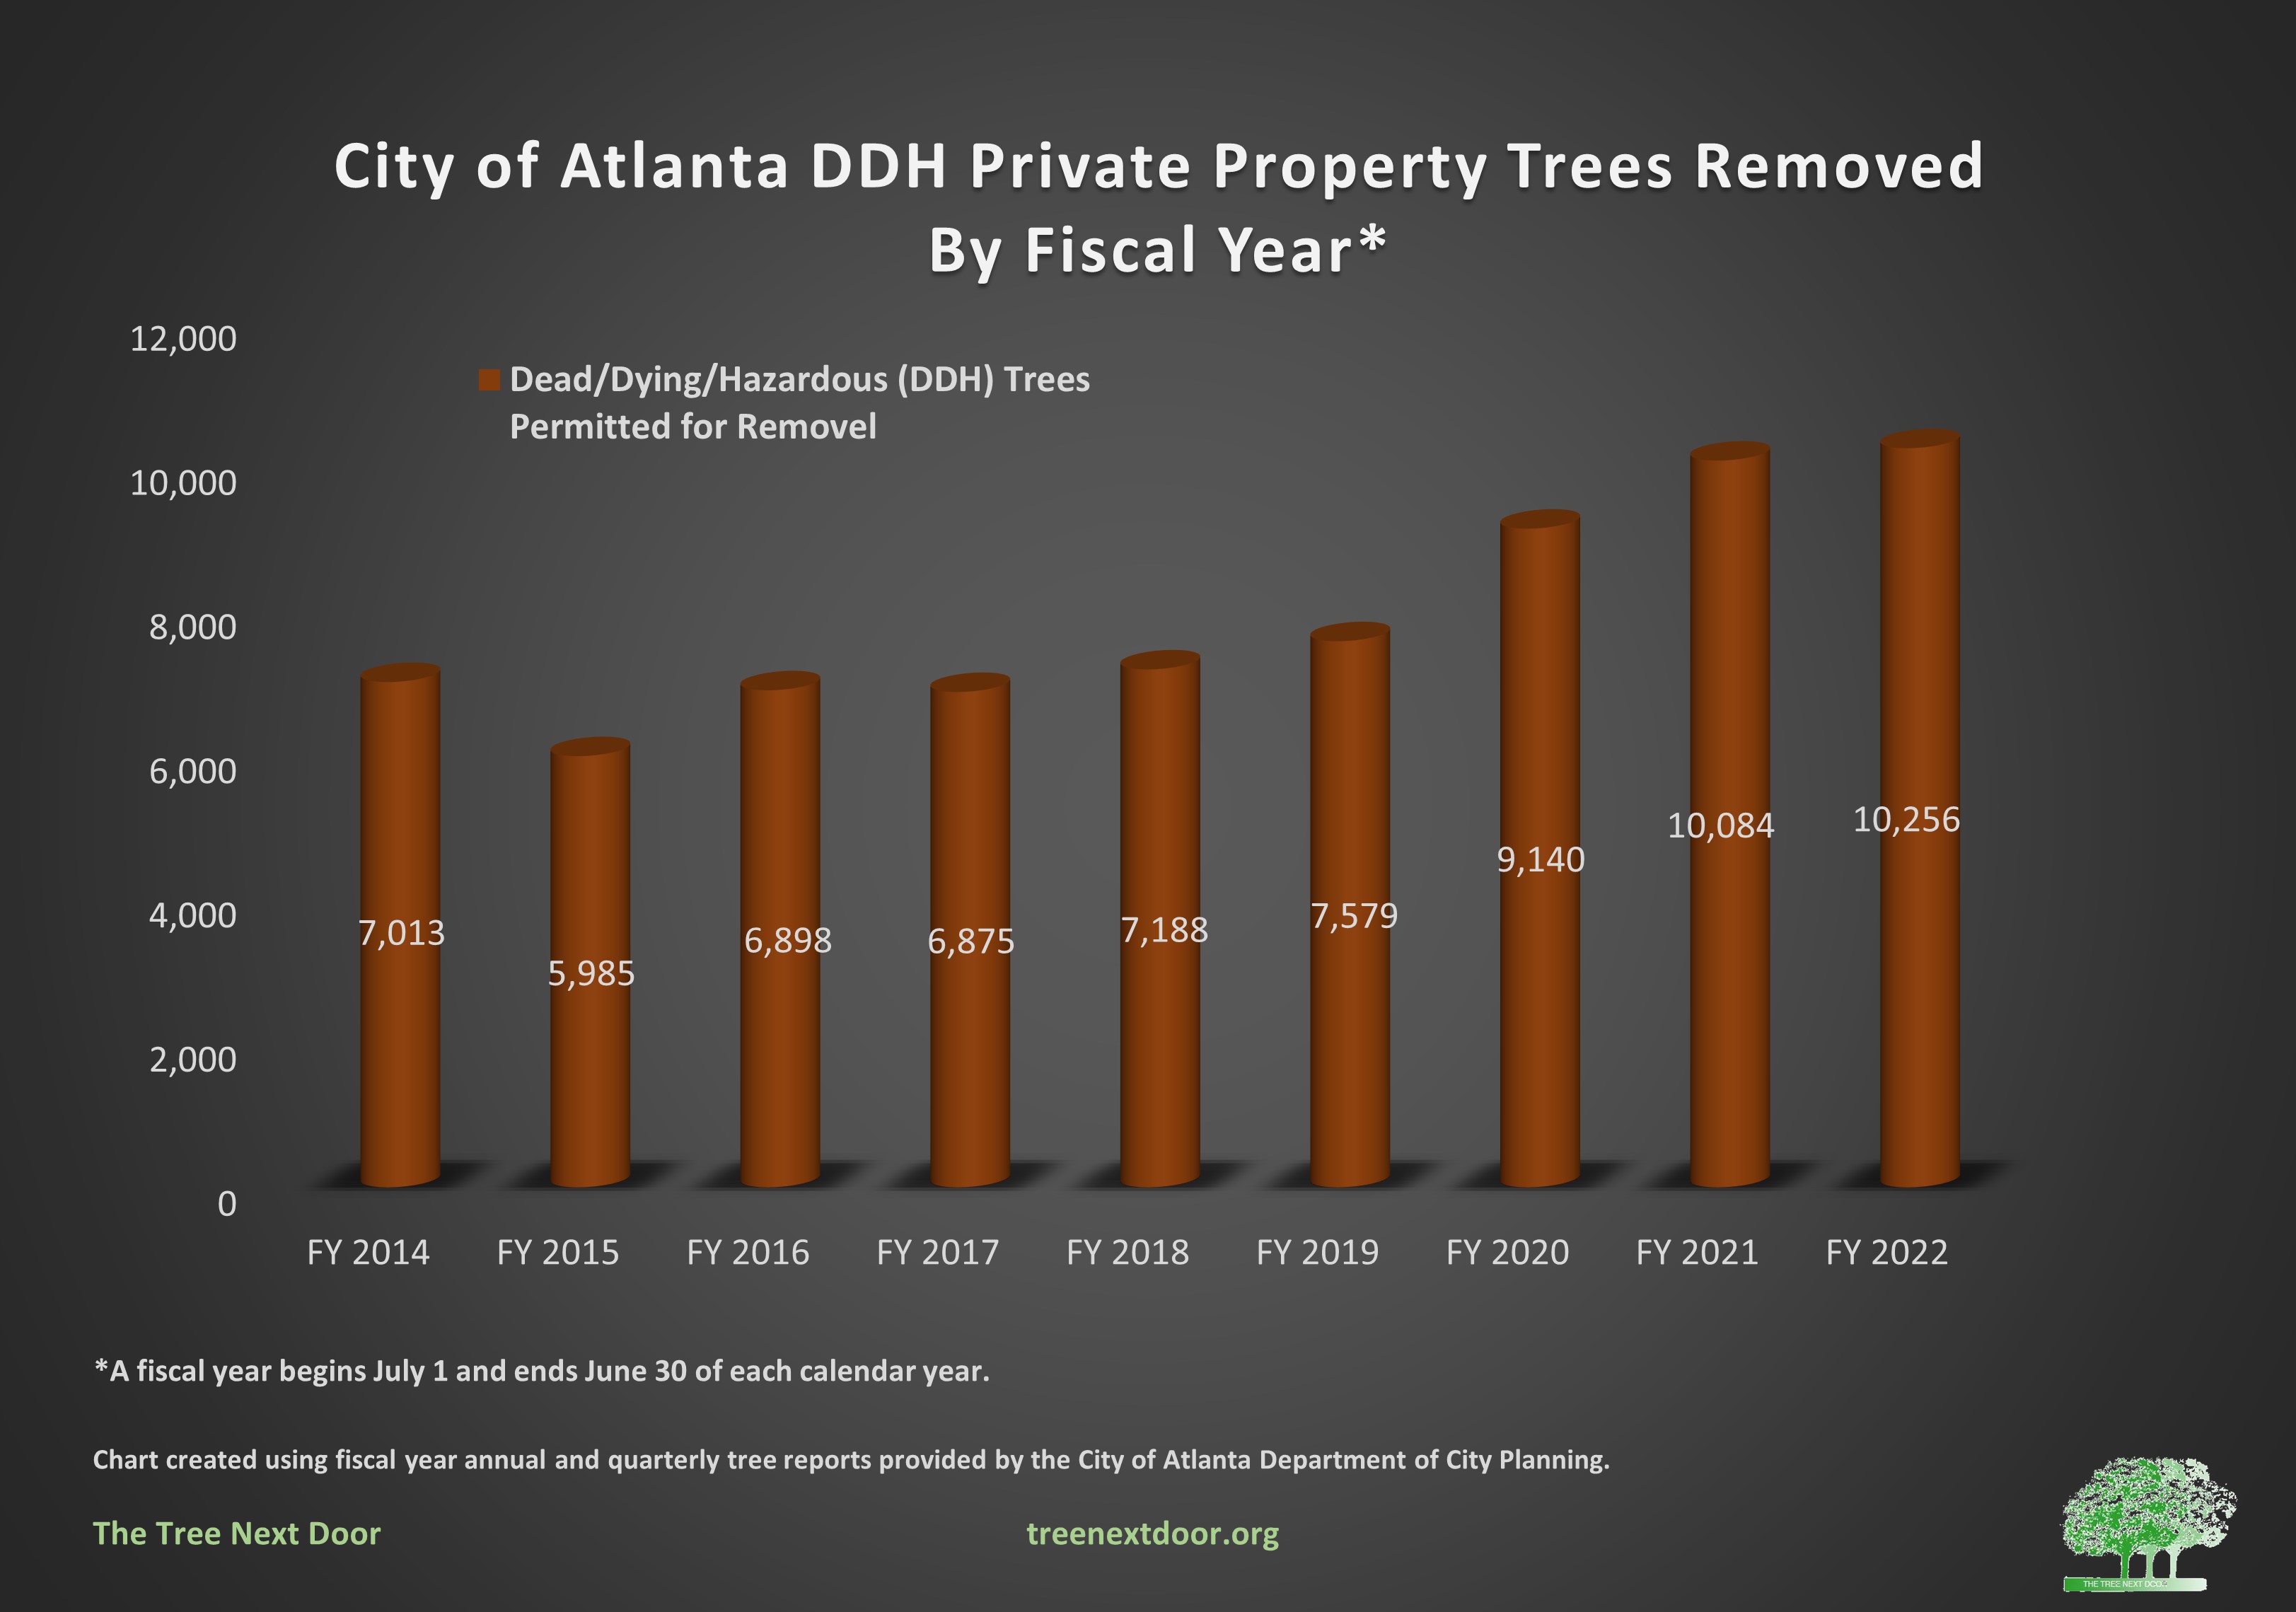 ddh trees removed by fiscal year